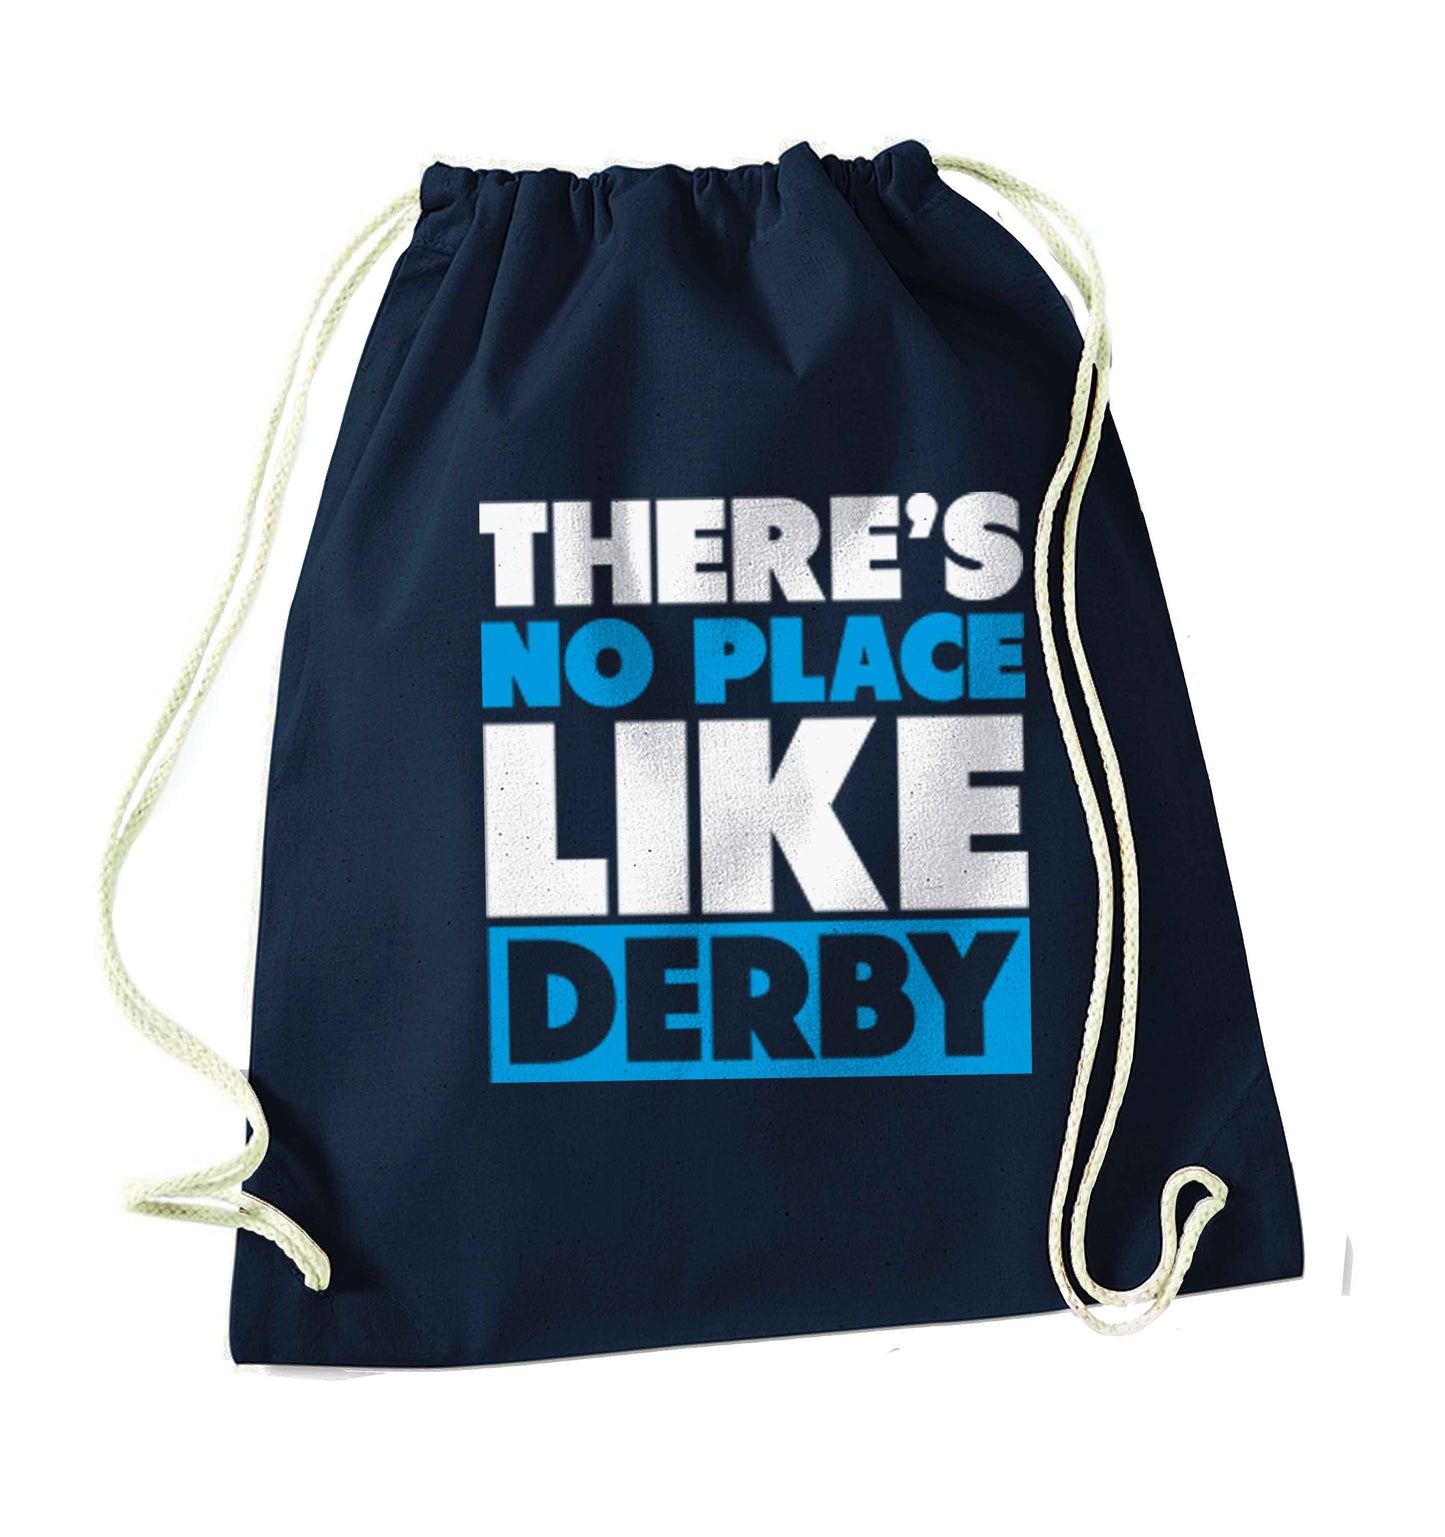 There's no place like Derby navy drawstring bag